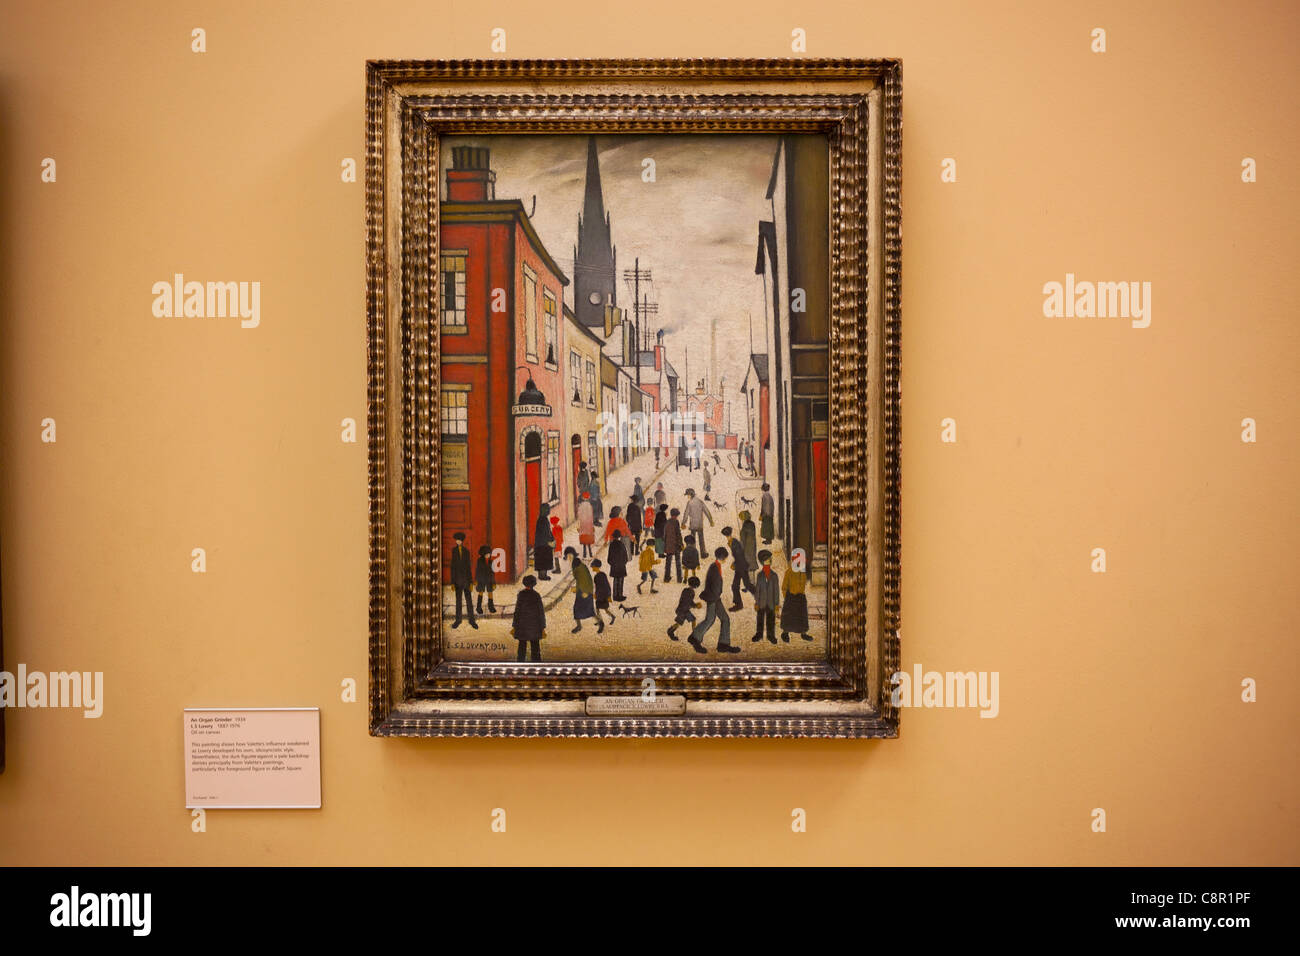 Painting by L S Lowry on display at Manchester City Art Gallery Stock Photo